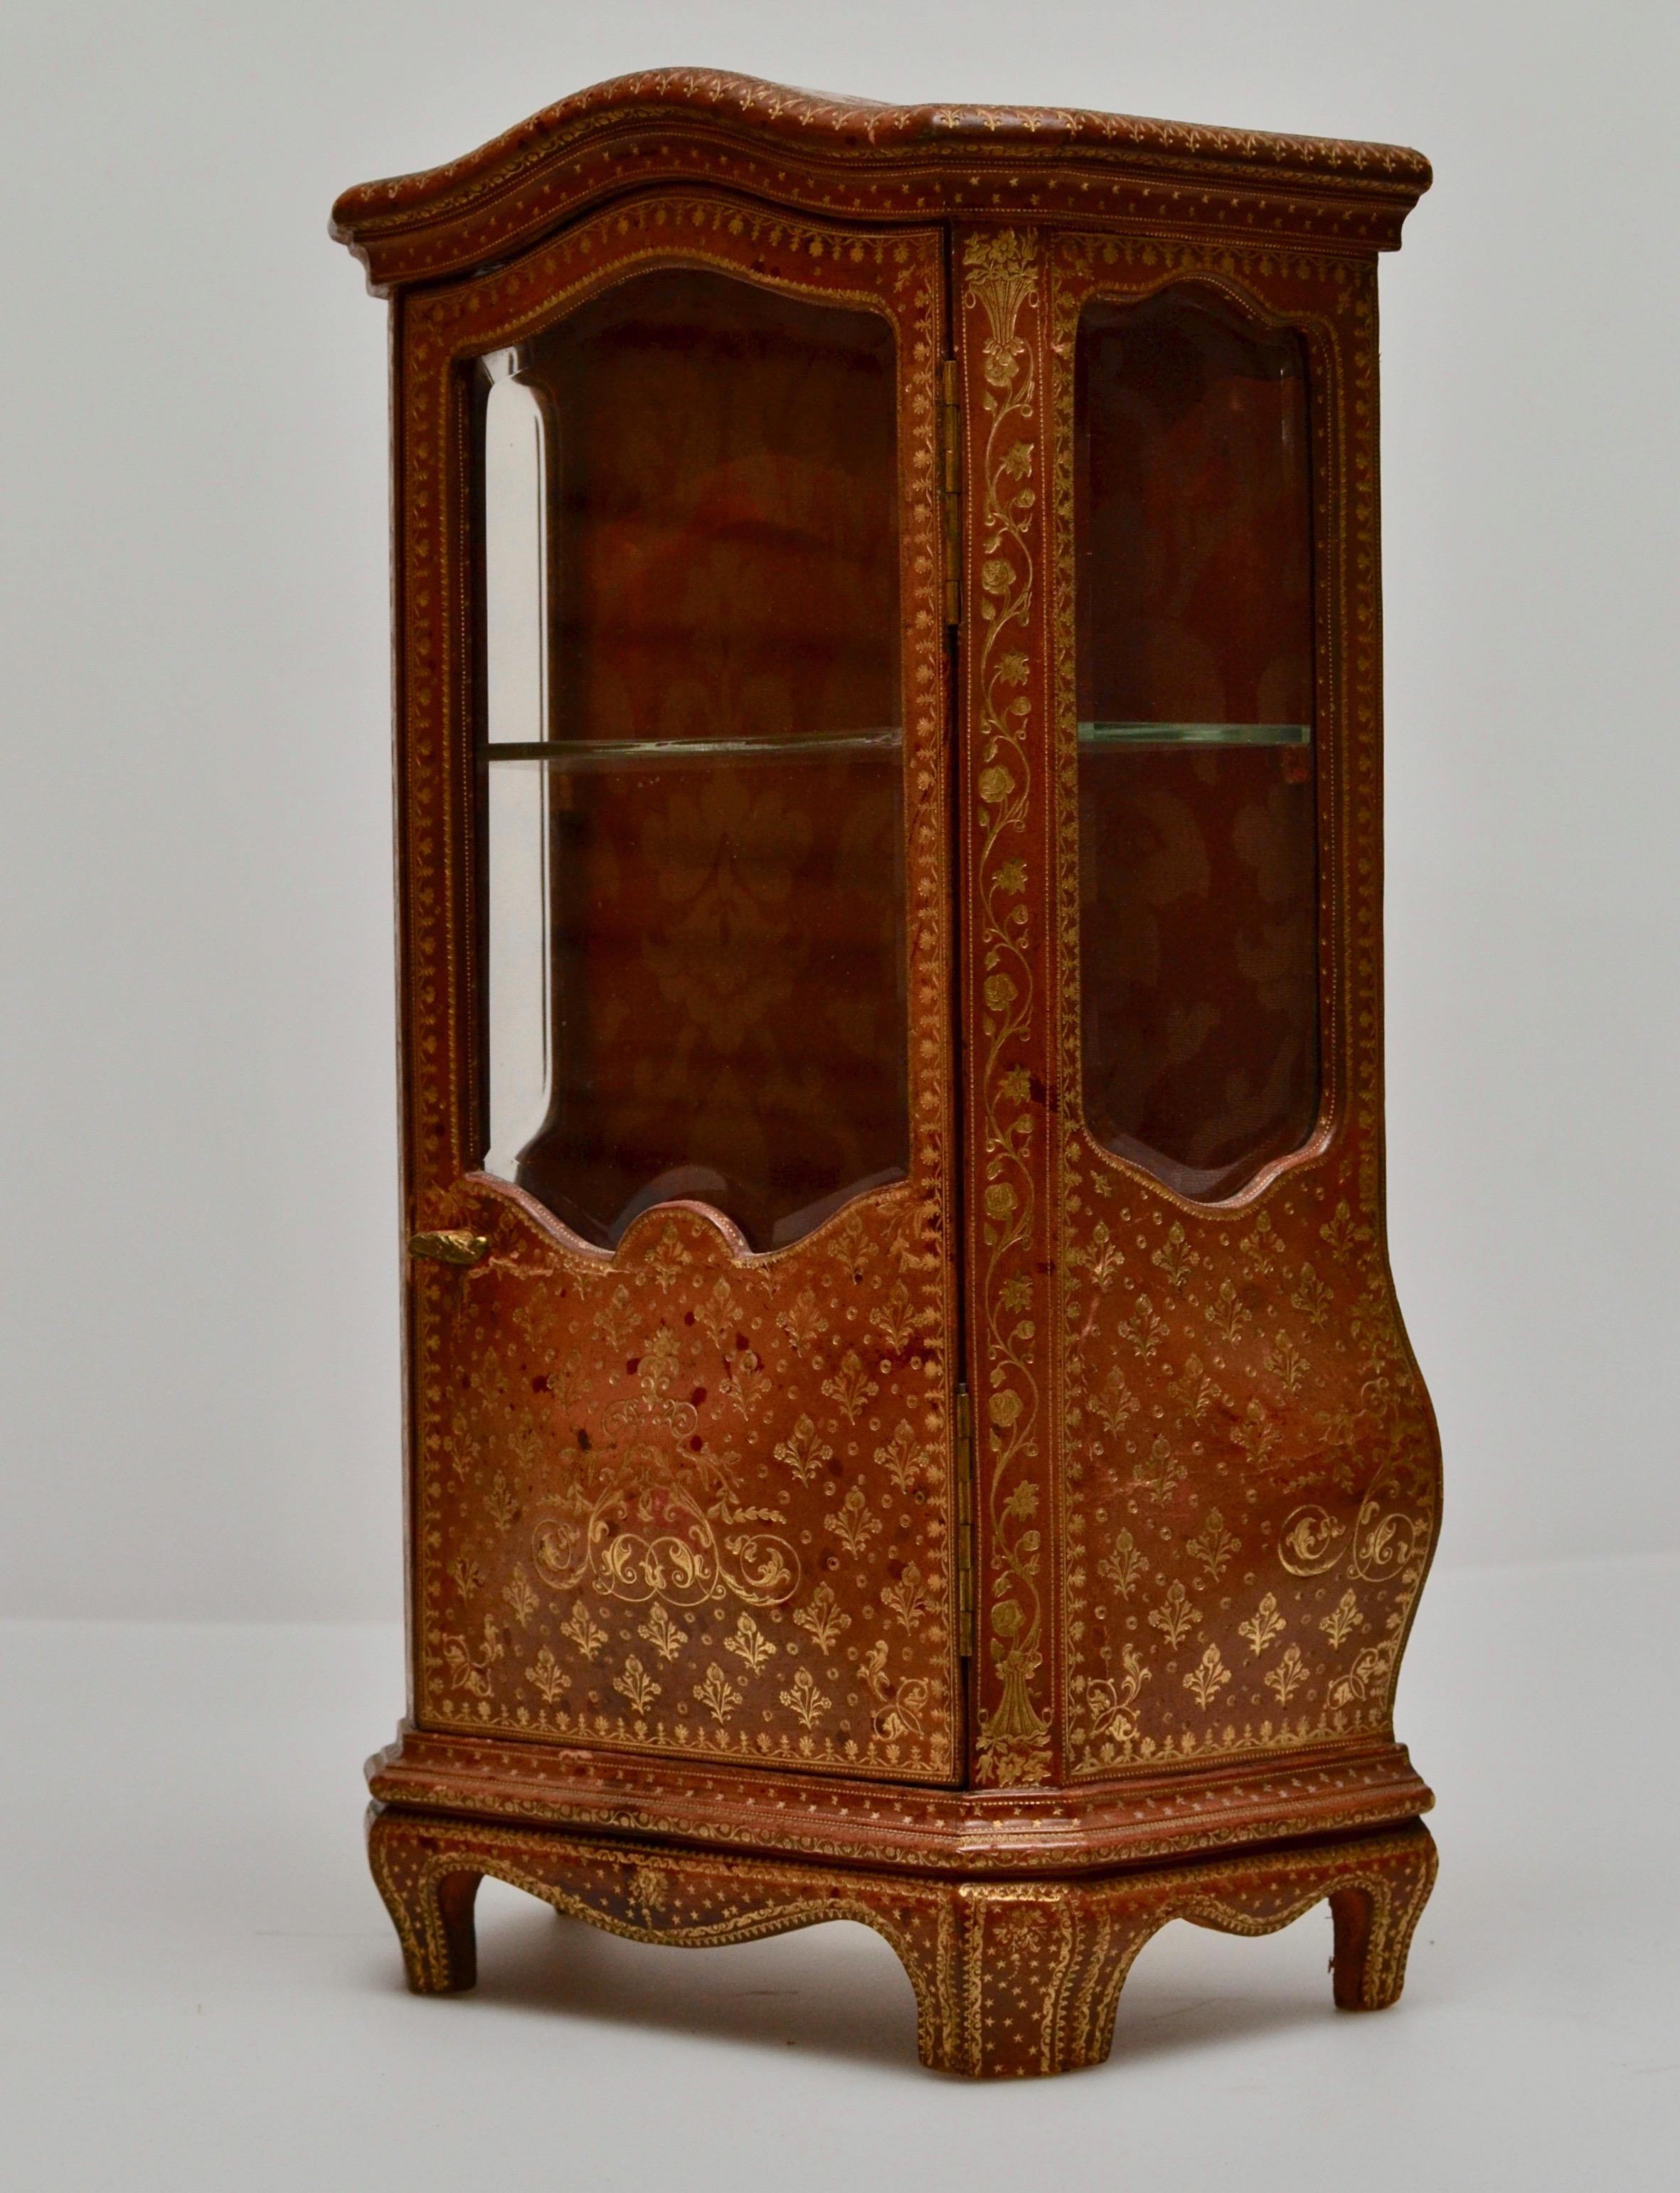 A miniature cabinet with gilt embossed leather, late 19th century-early 20th century. Wood frame.